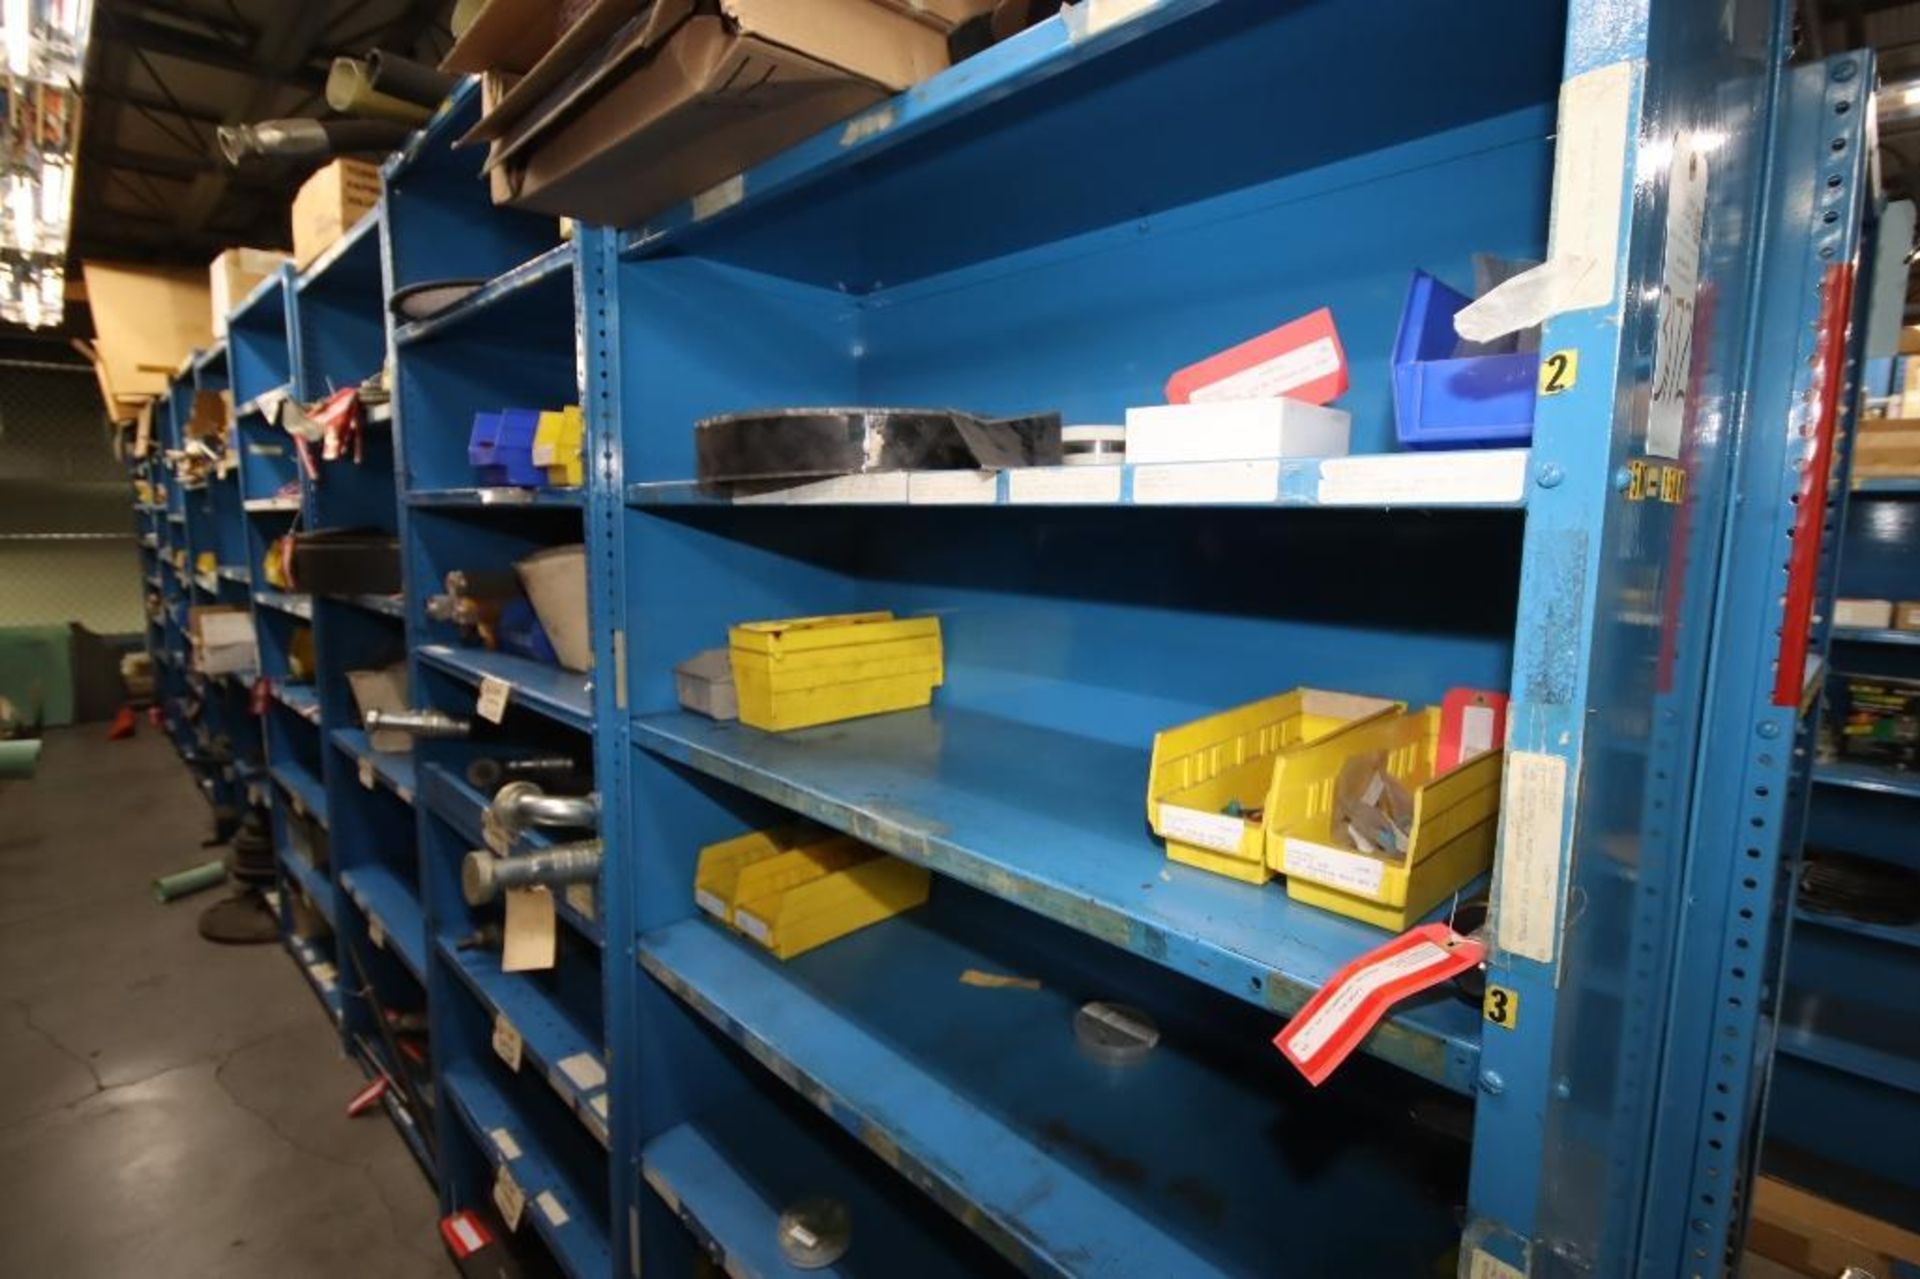 (20) Sections of Adjustable Shelve Units (145-154, 155-162 & 164), SHELVES/RACKS ONLY-NO CONTENTS, L - Image 2 of 3